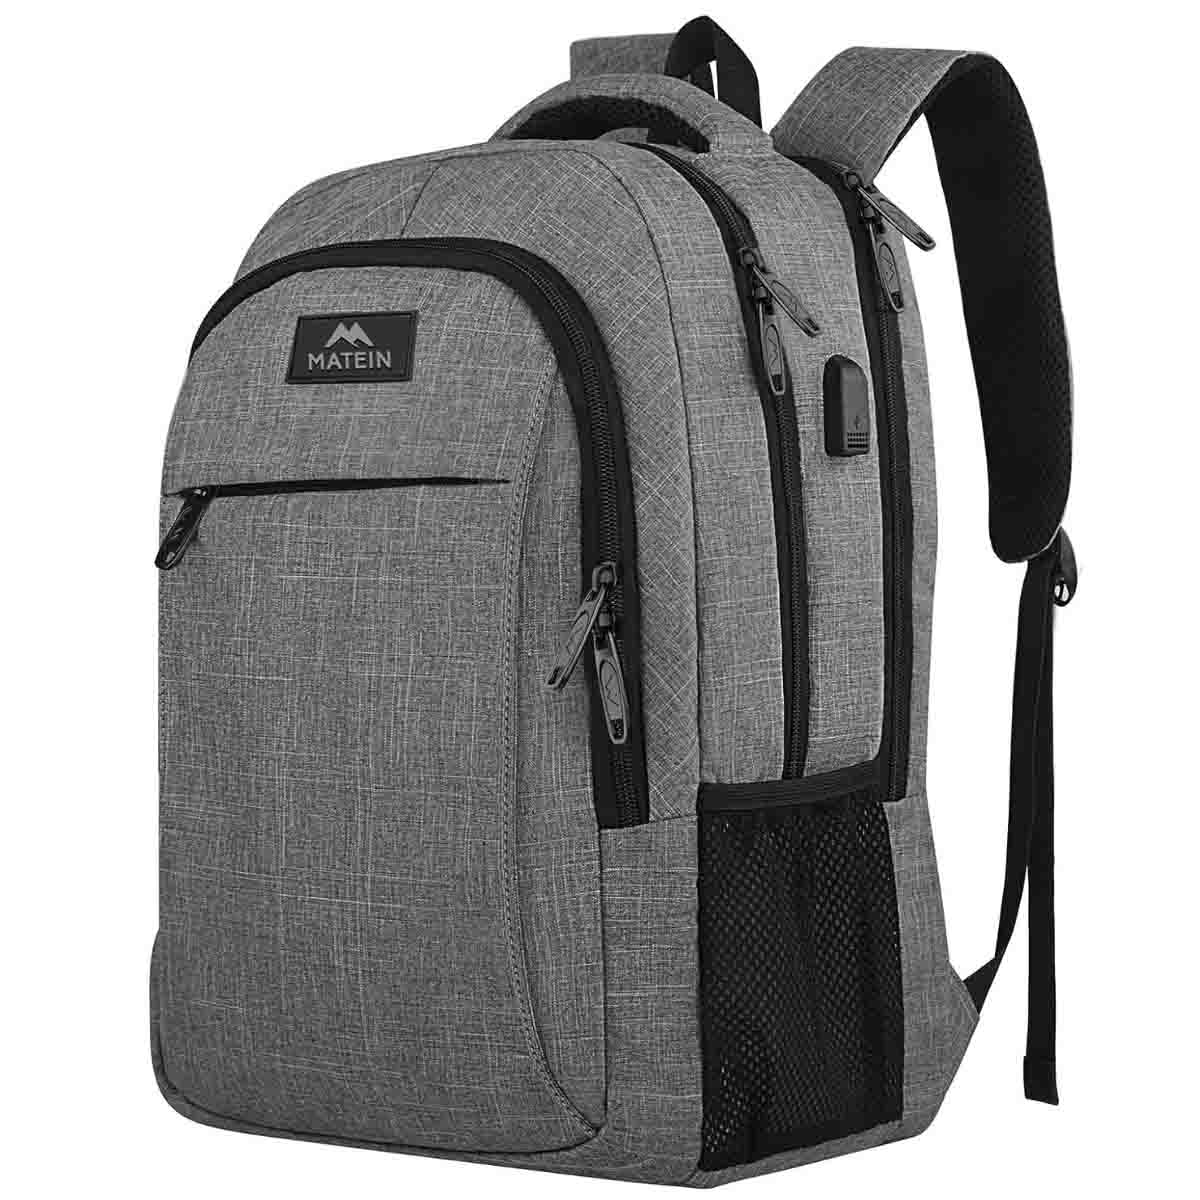 Grey backpack with Matein logo